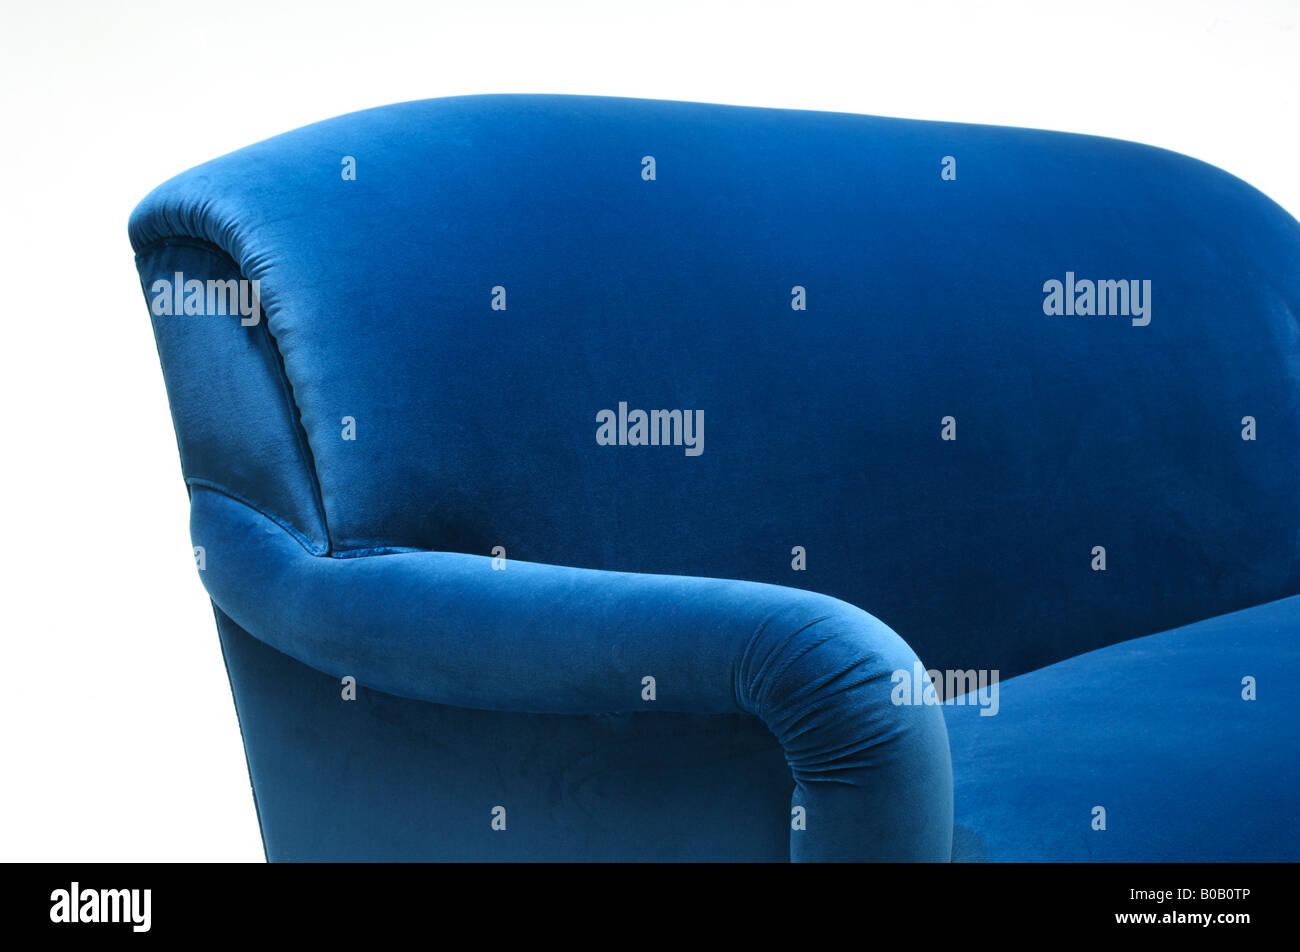 A close up section of a blue velvet sofa couch furniture Stock Photo